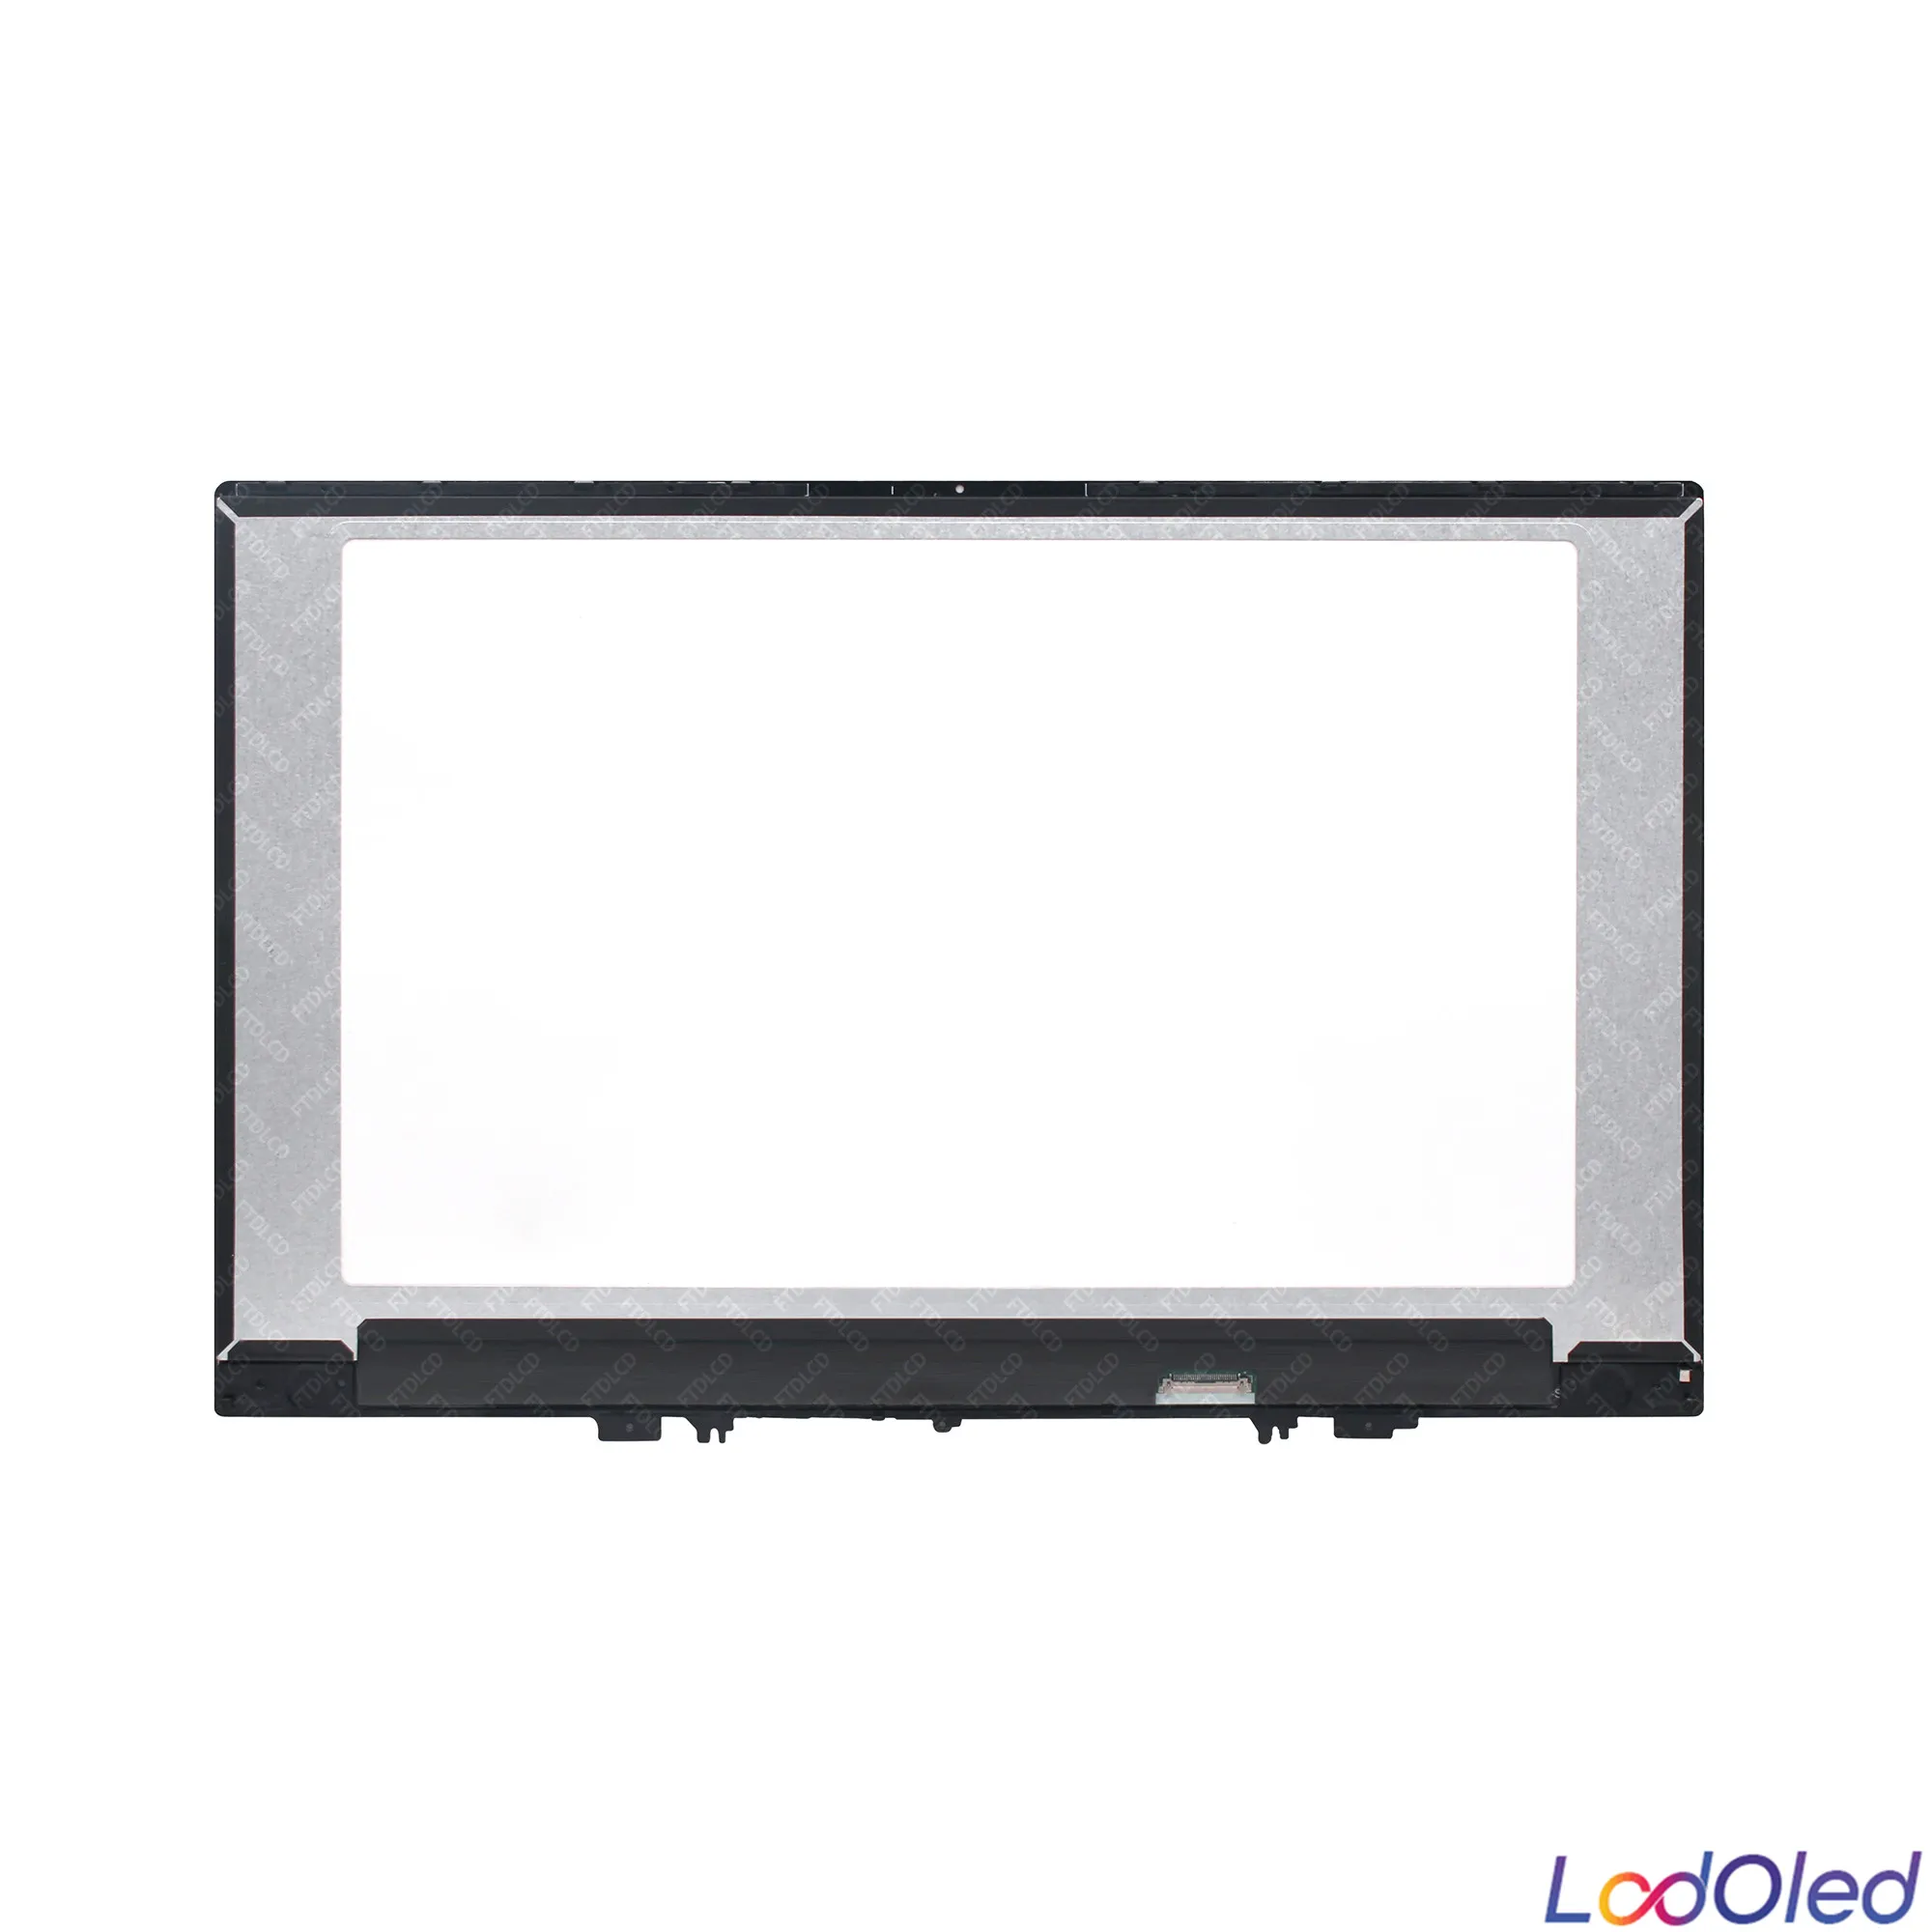 15 6 fhd ips lcd screen display panel glass assembly bezel for lenovo ideapad 530s 15ikb 81ev non touch 5d10r06098 5d10m42873 free global shipping